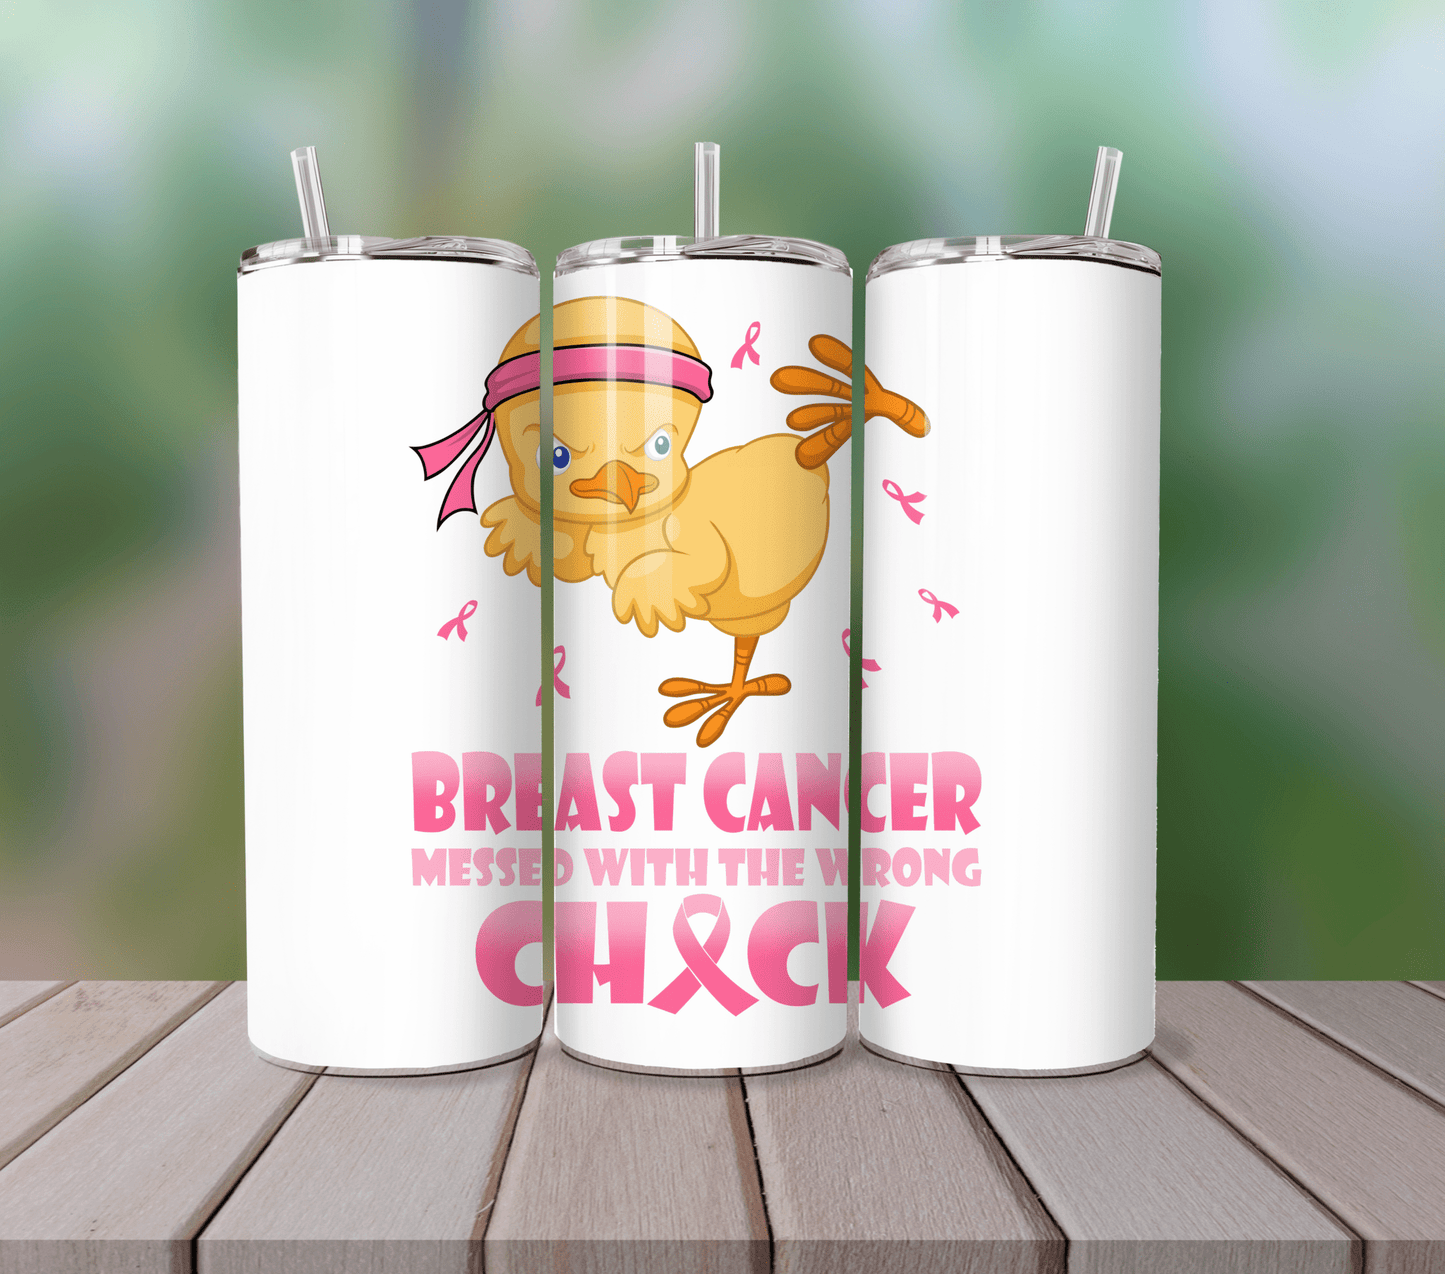 Breast Cancer Messed With The Wrong Chick Tumbler